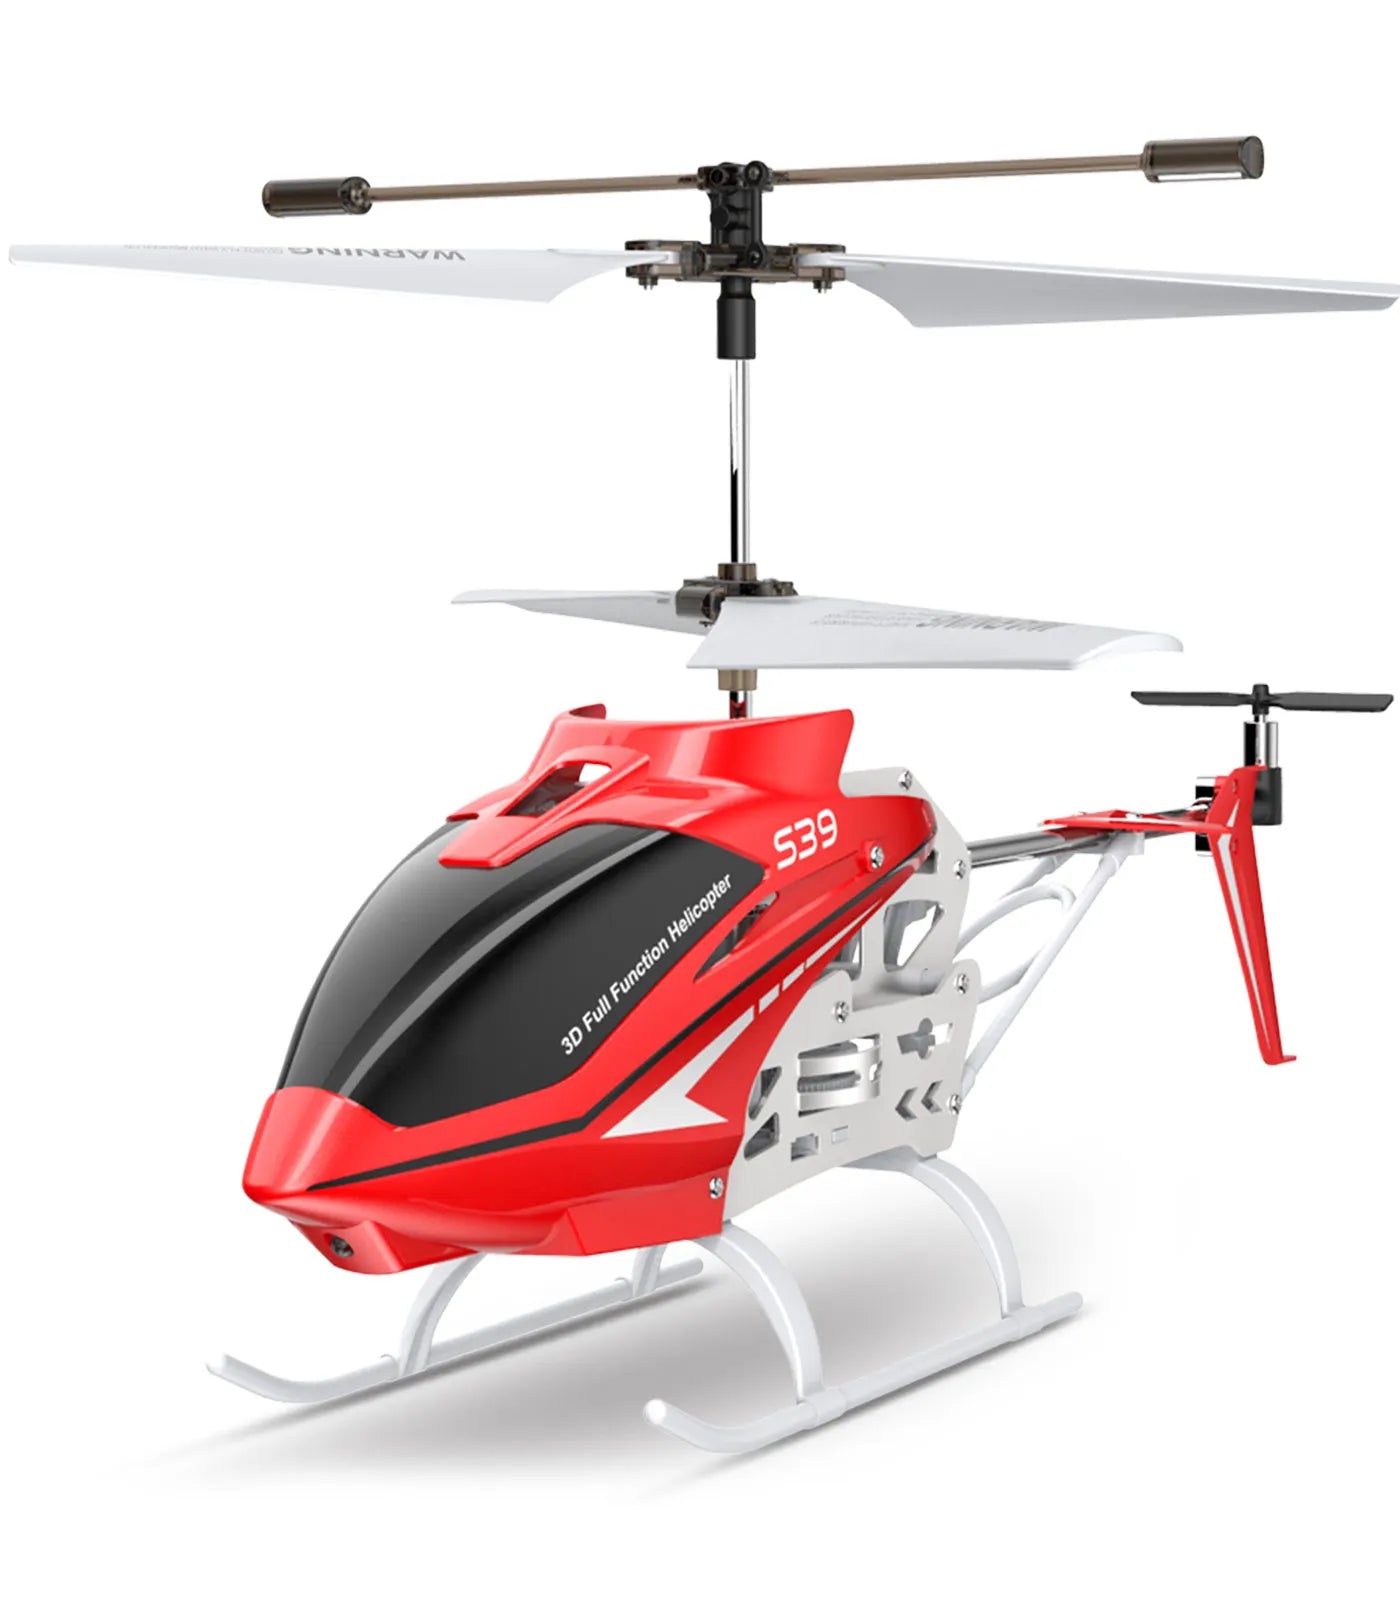 SYMA S39 RC Helicopter, Gyro Stabilizer, Moves More Flexible and Stable.2 Frequencies